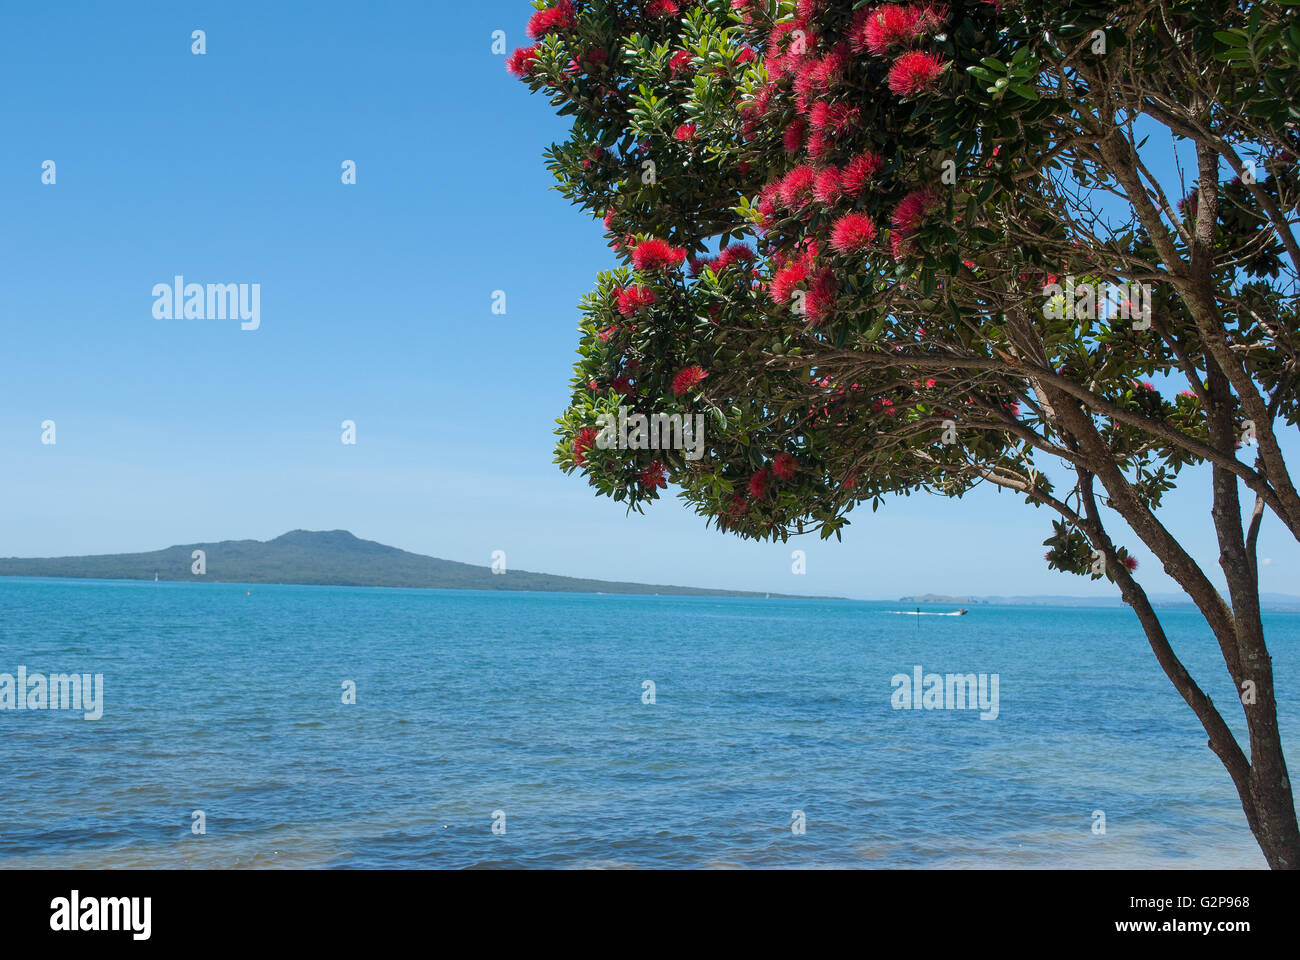 Pohutukawa tree in bloom with Rangitoto Island on the background Stock Photo